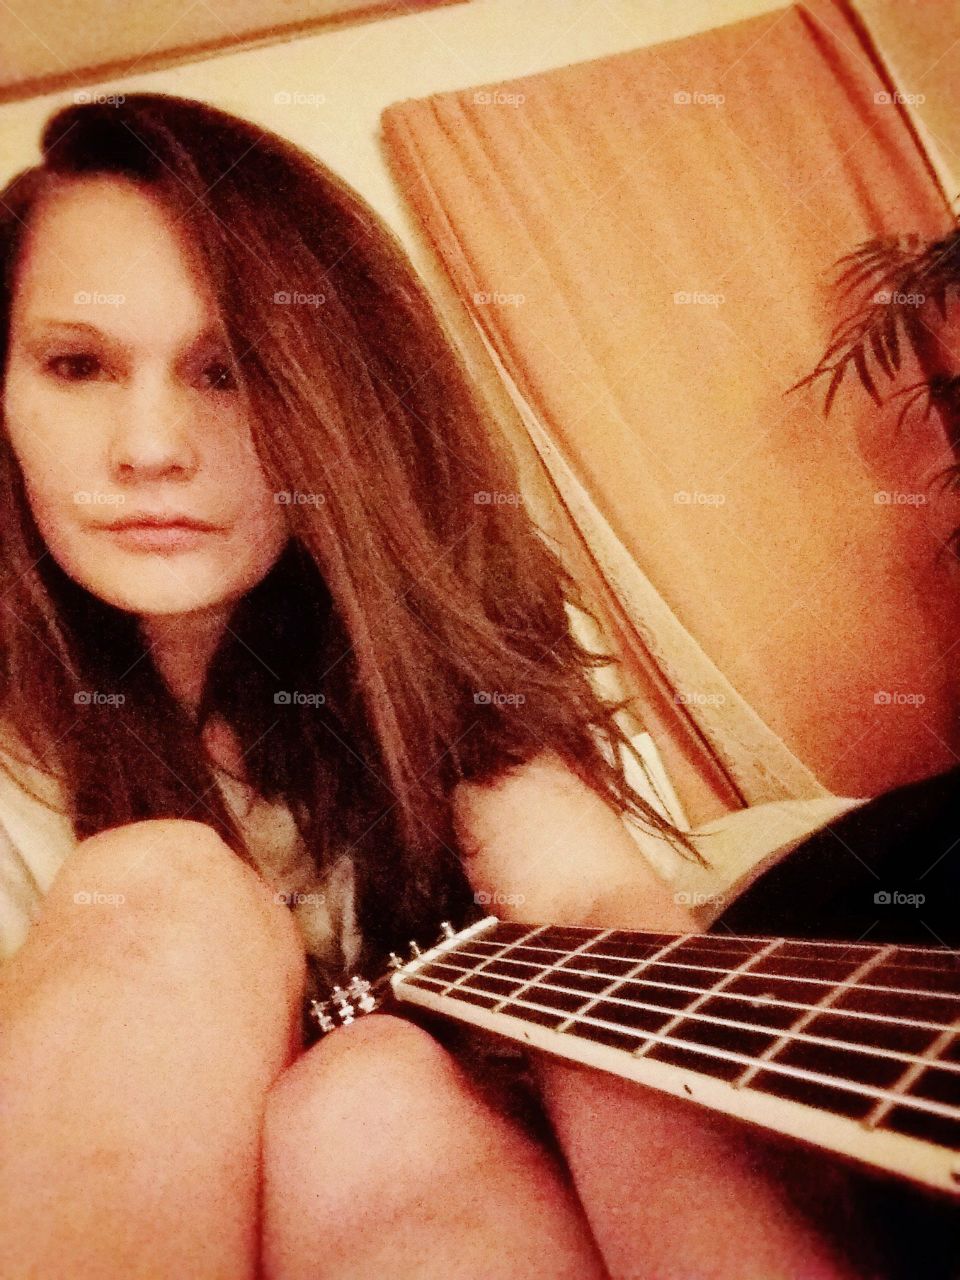 Close-up of a woman with guitar